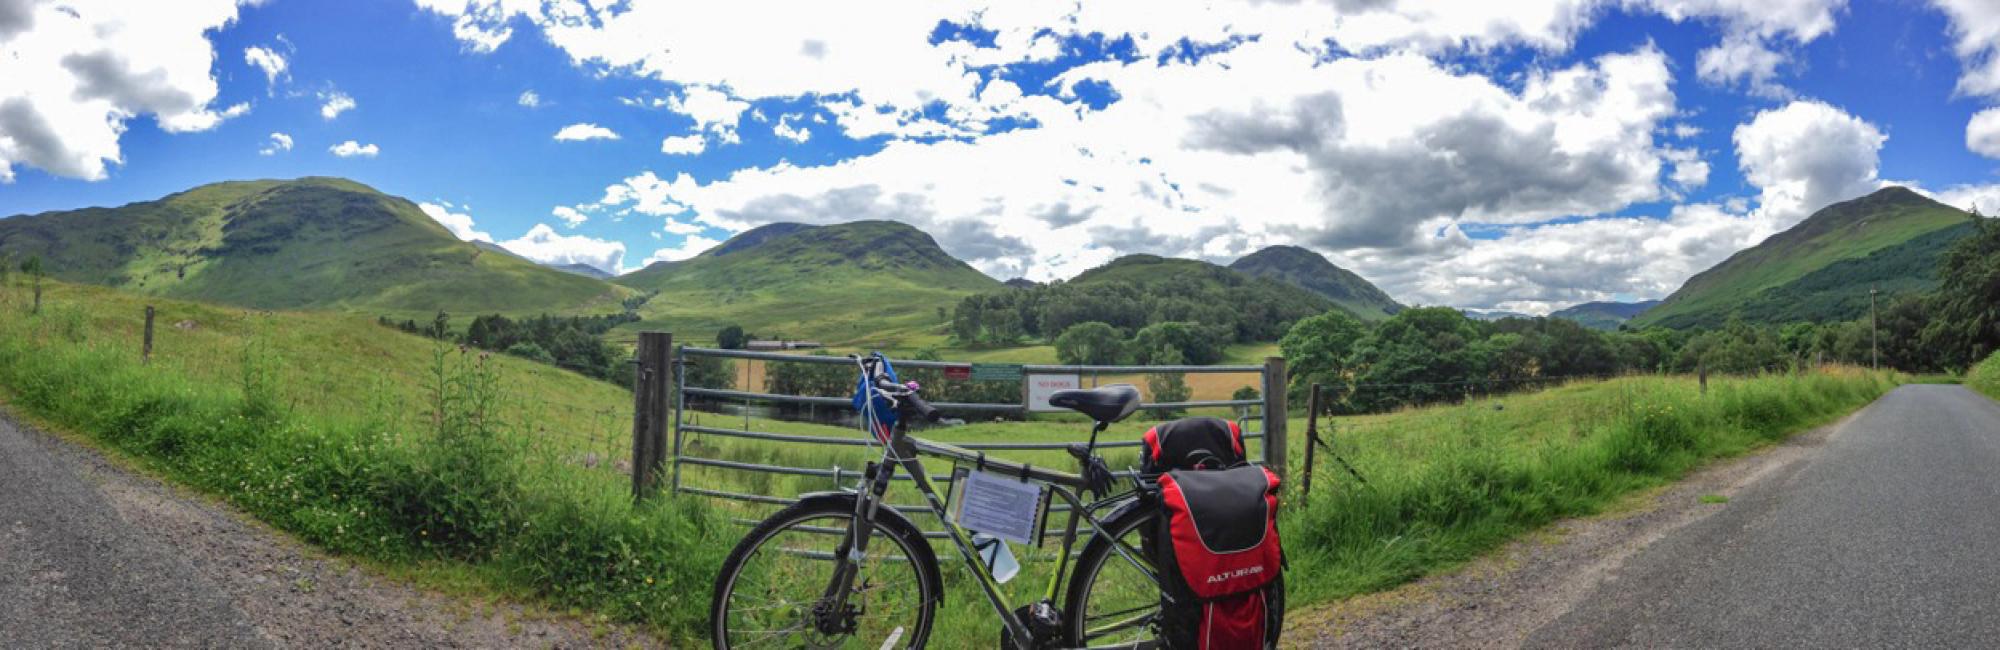 Explore Britain's mountains on a self-guided bike tour